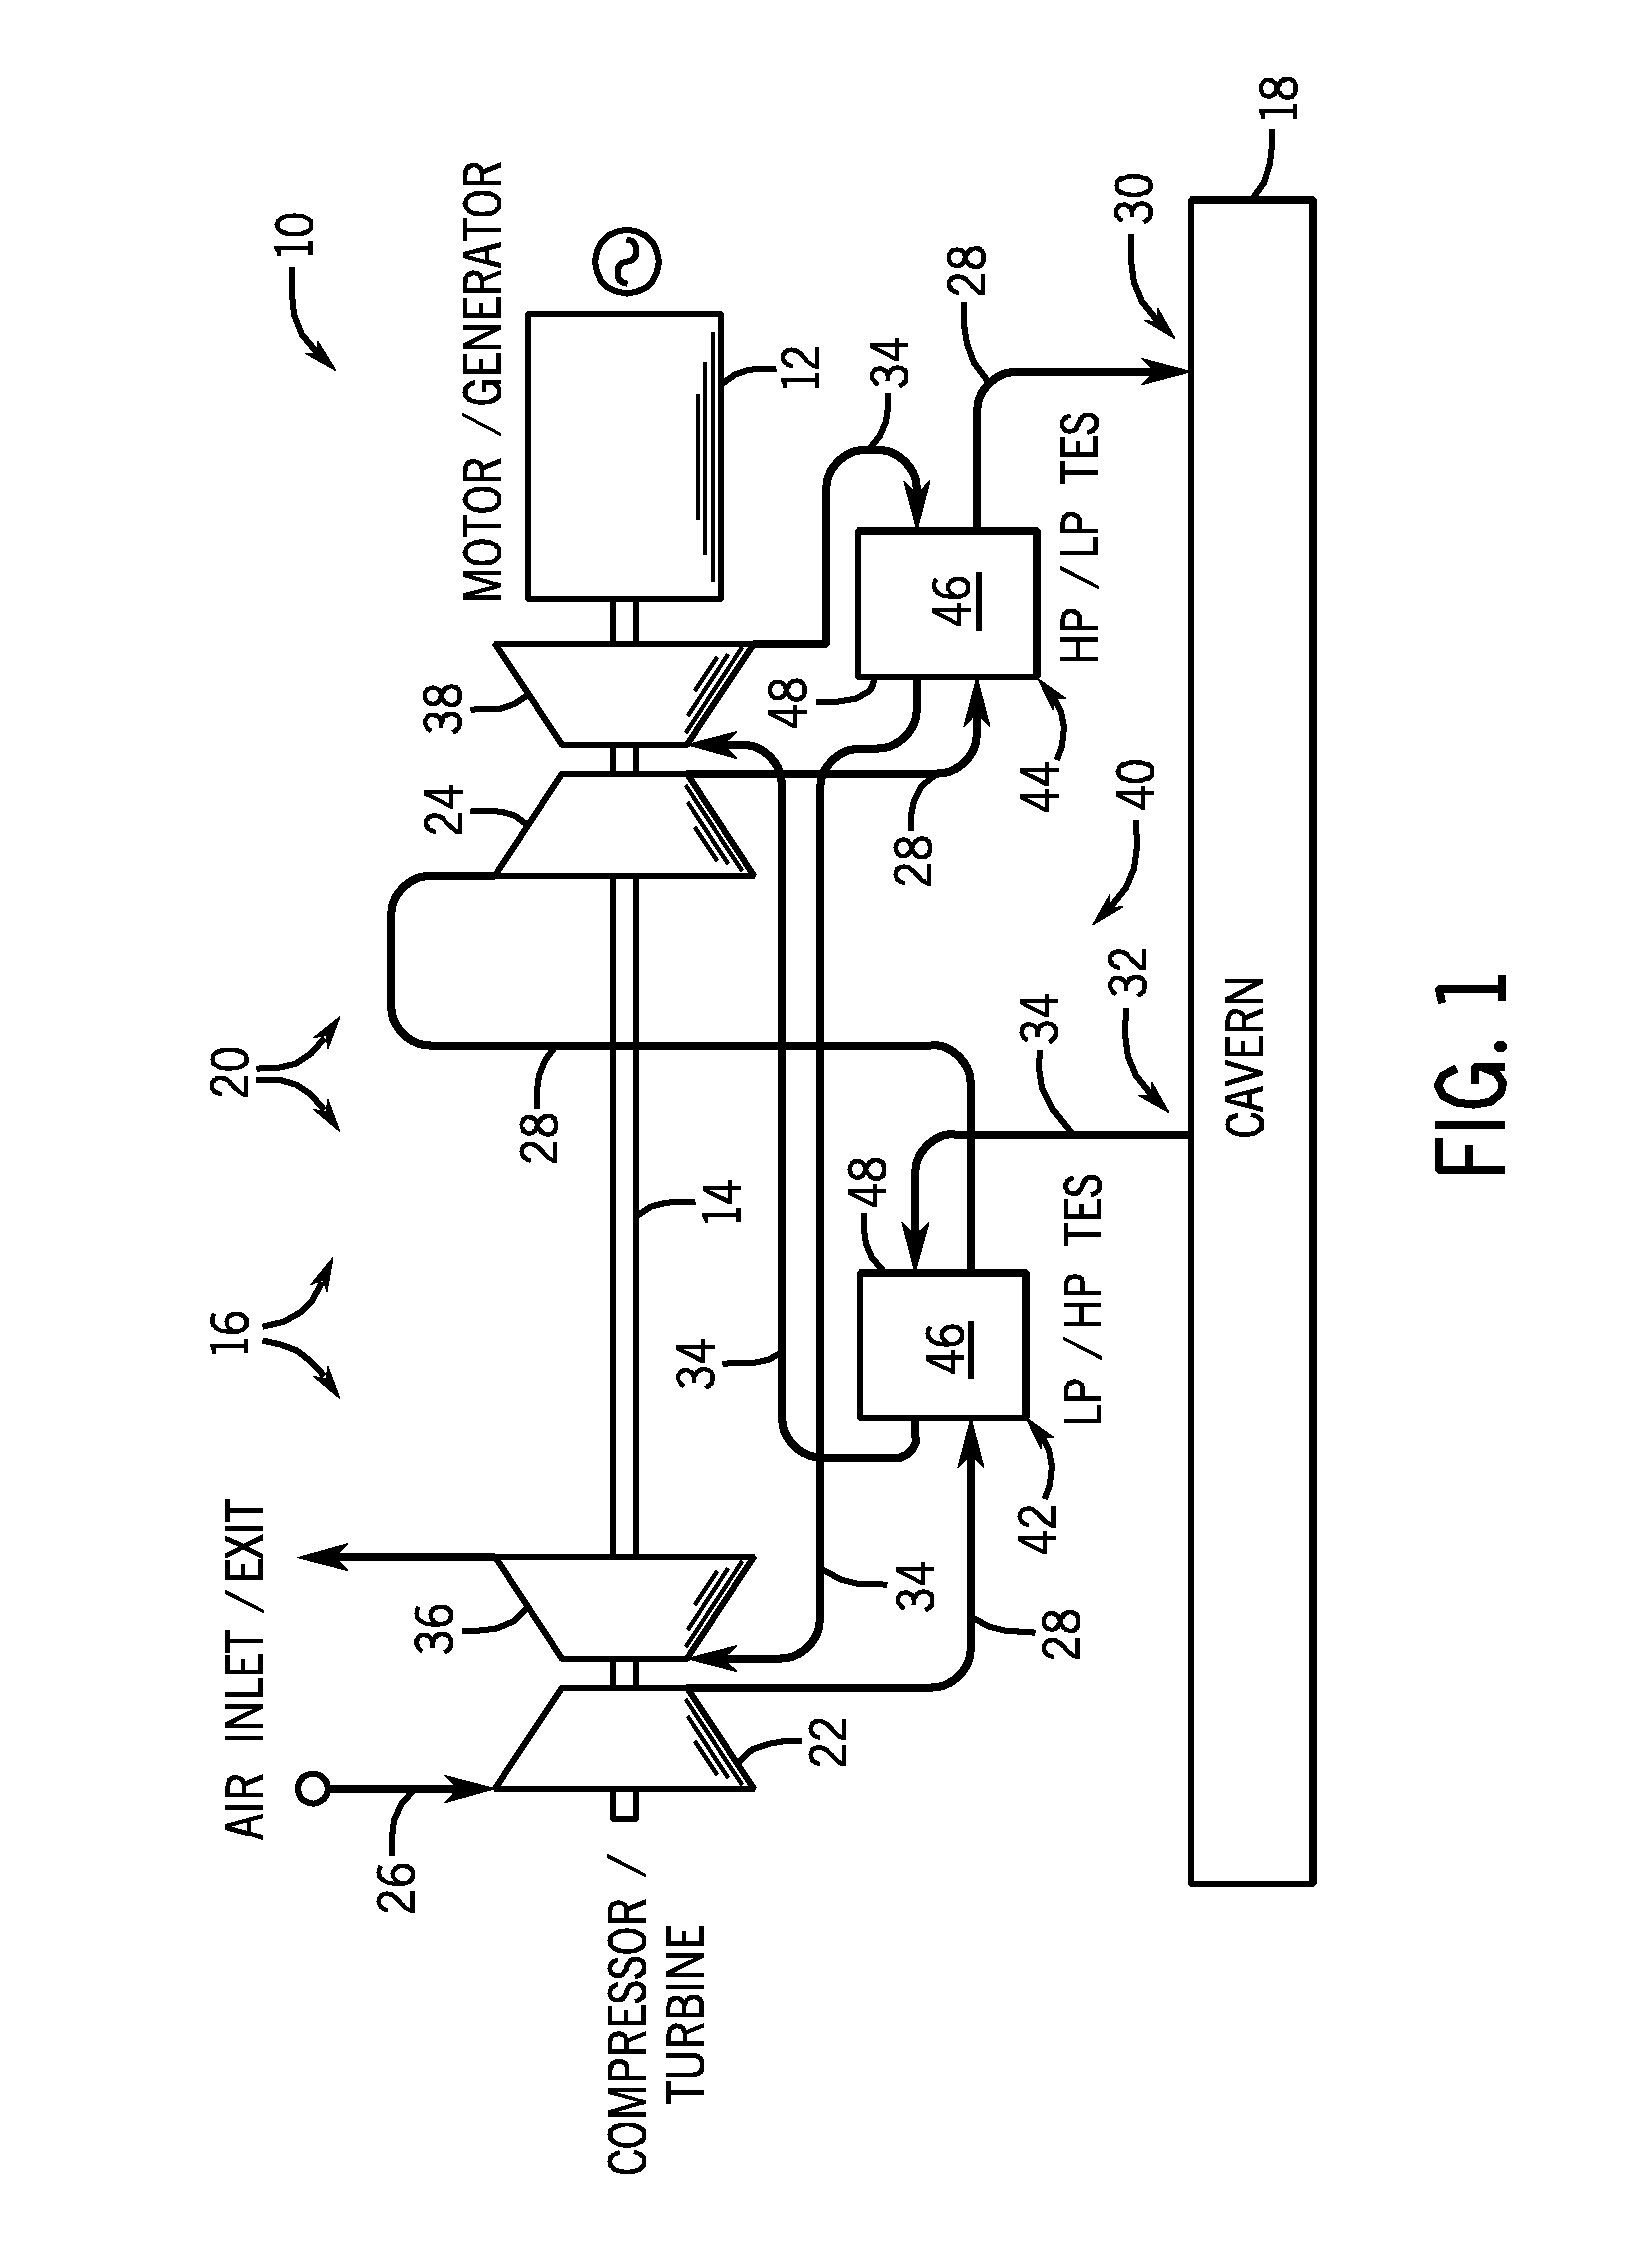 Adiabatic compressed air energy storage system with multi-stage thermal energy storage